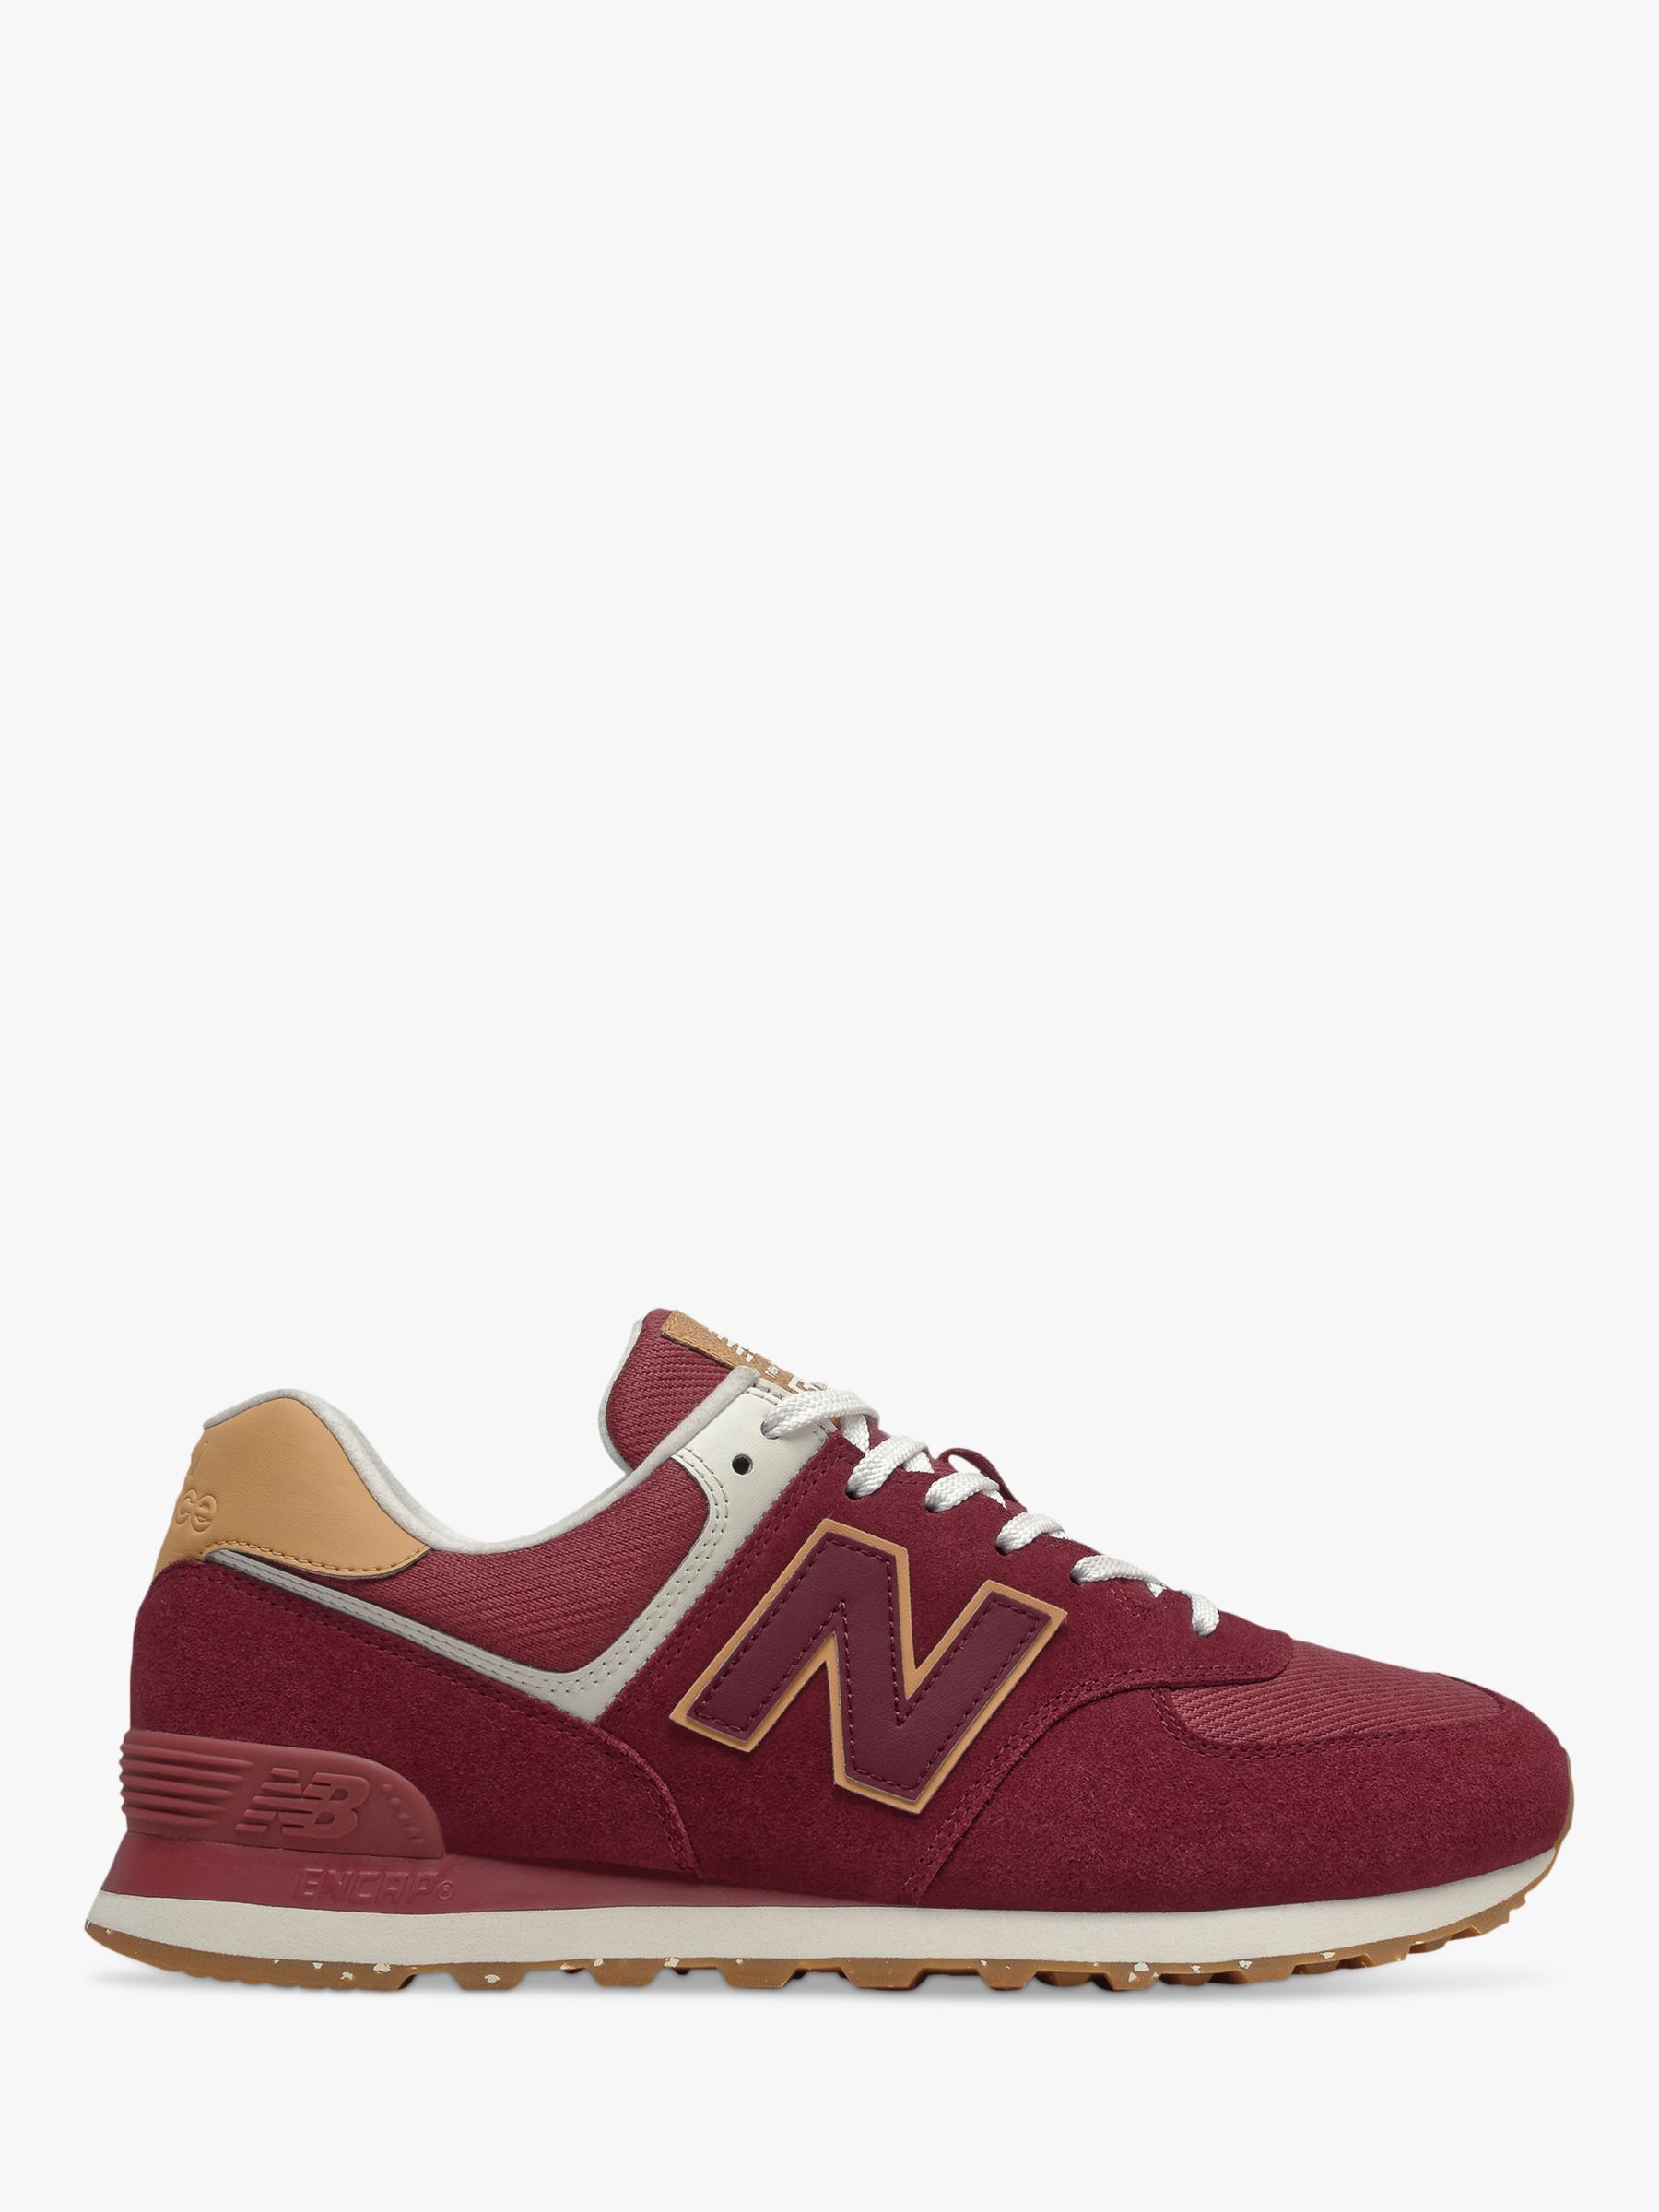 New Balance 574 Suede Trainers, Burgundy at John Lewis & Partners